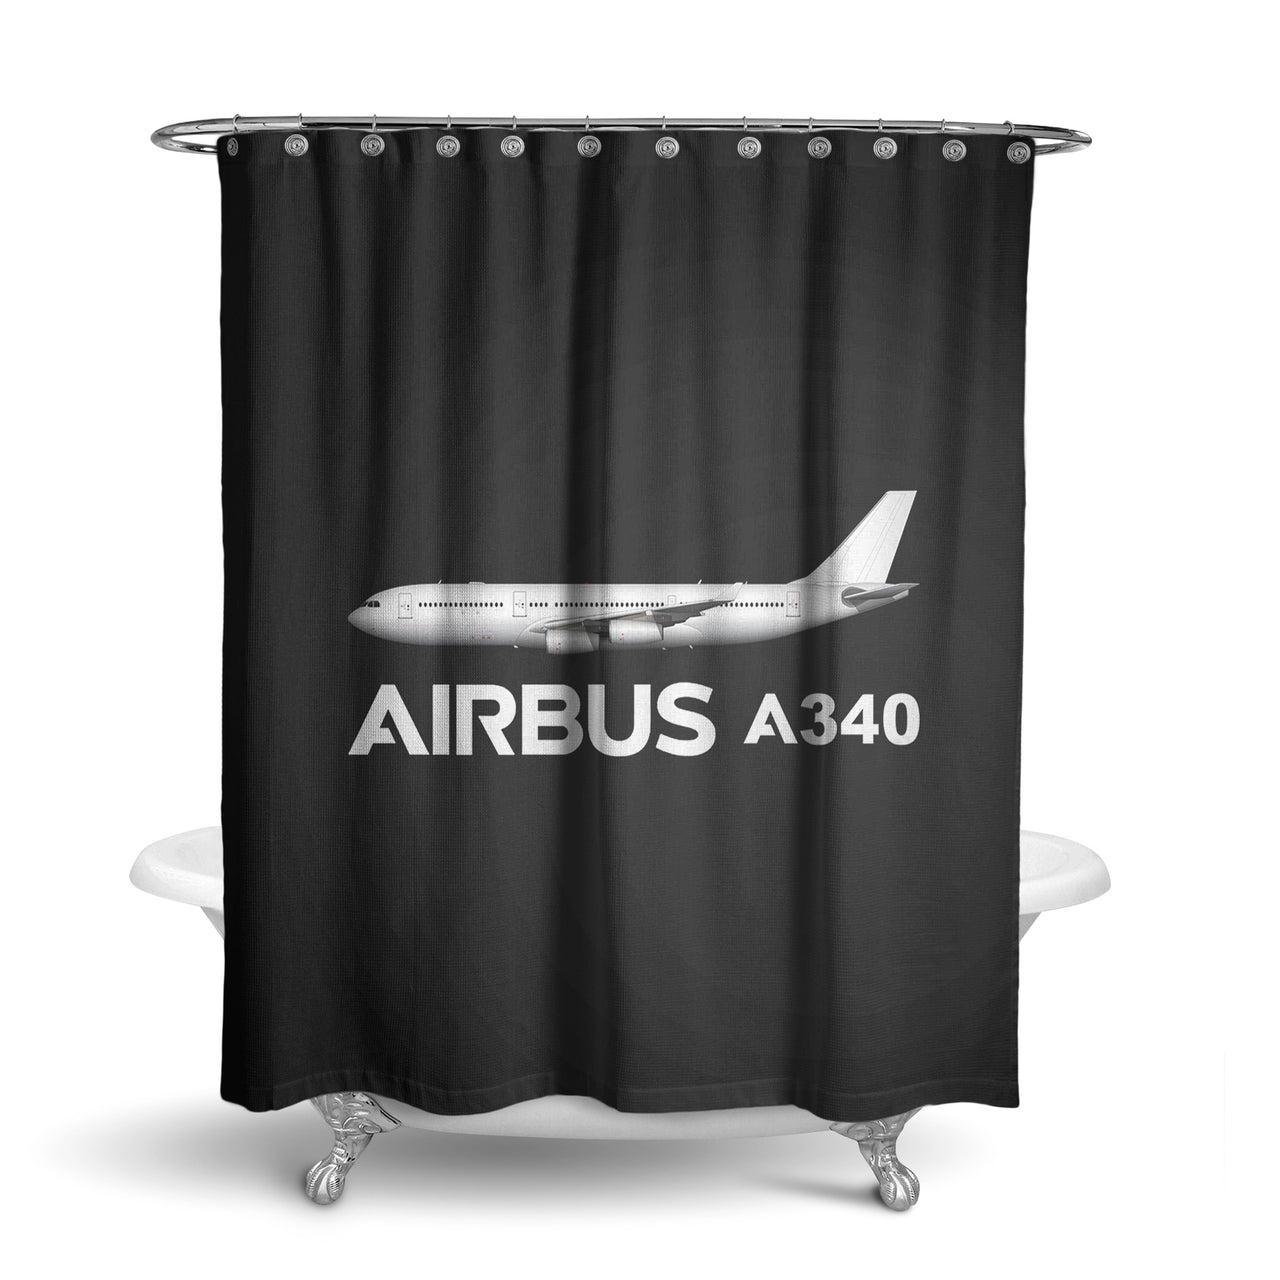 The Airbus A340 Designed Shower Curtains